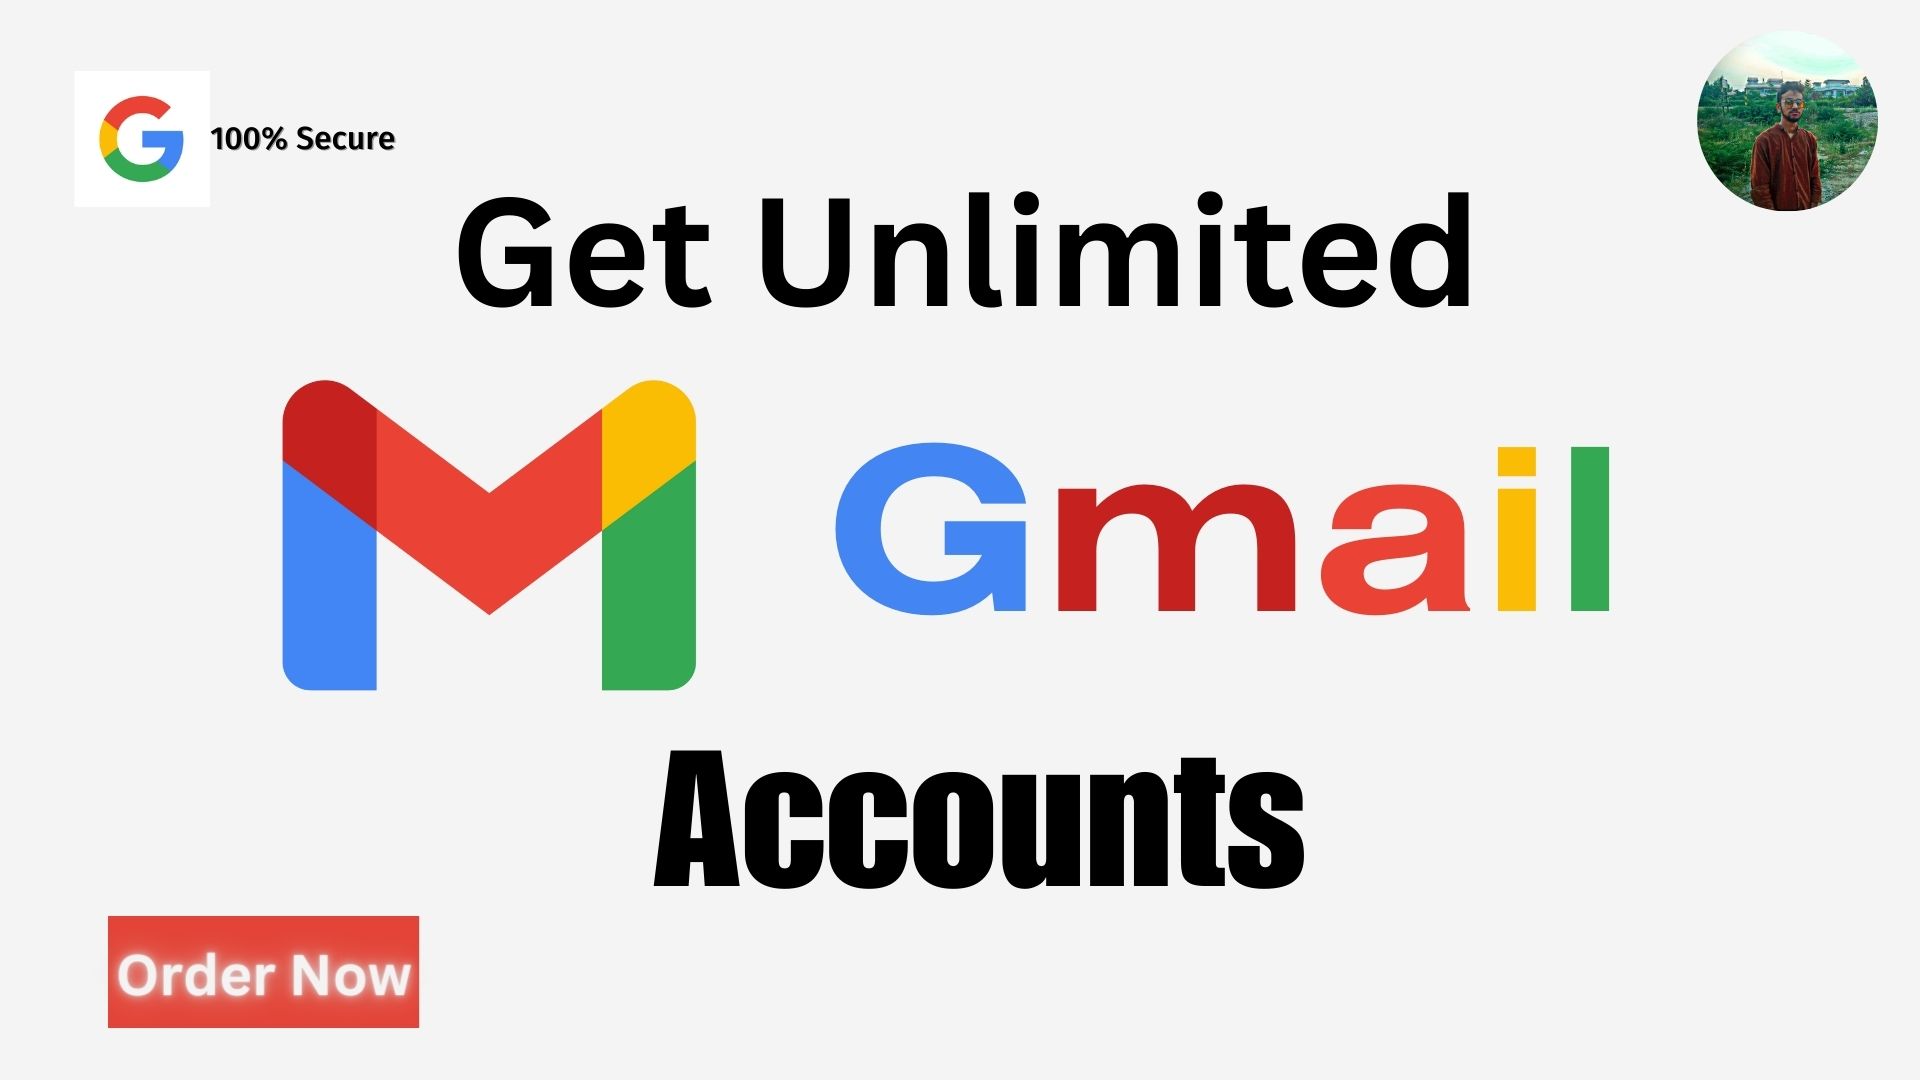 Get Unlimited Gmail accounts for your buisness